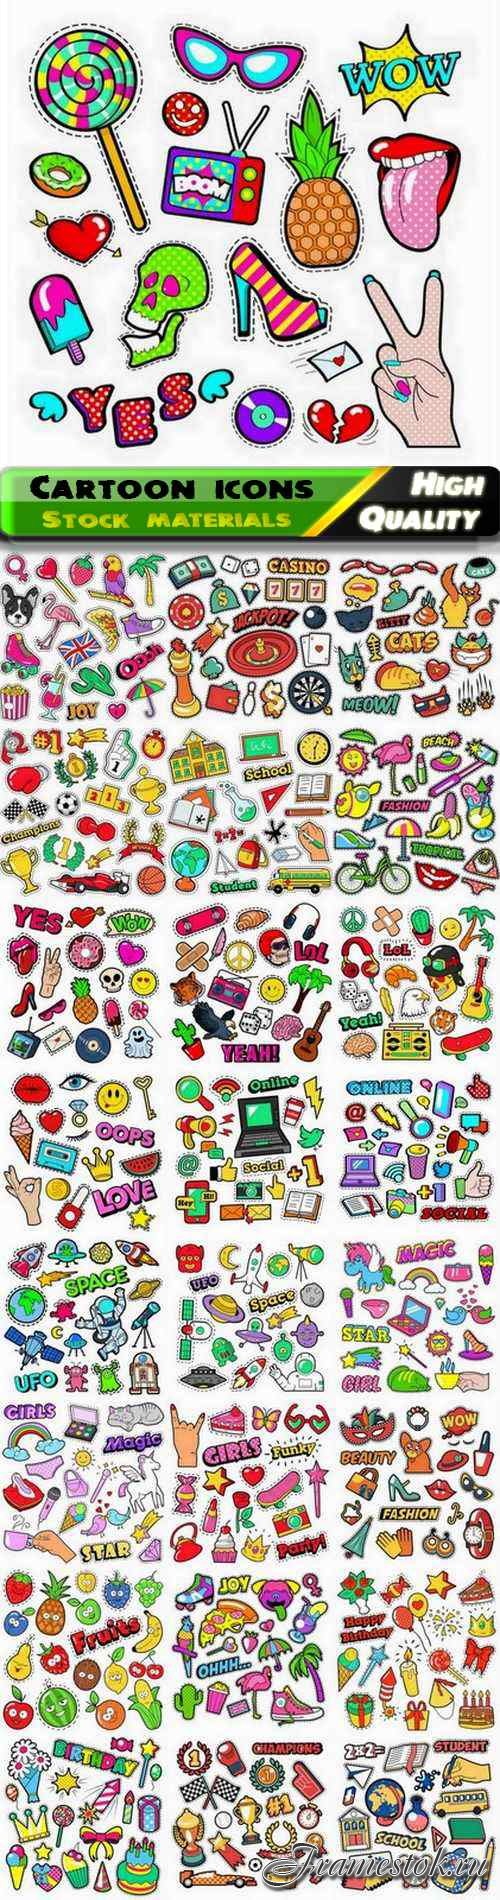 Set of different cartoon icons and objects illustration 2 25 Eps